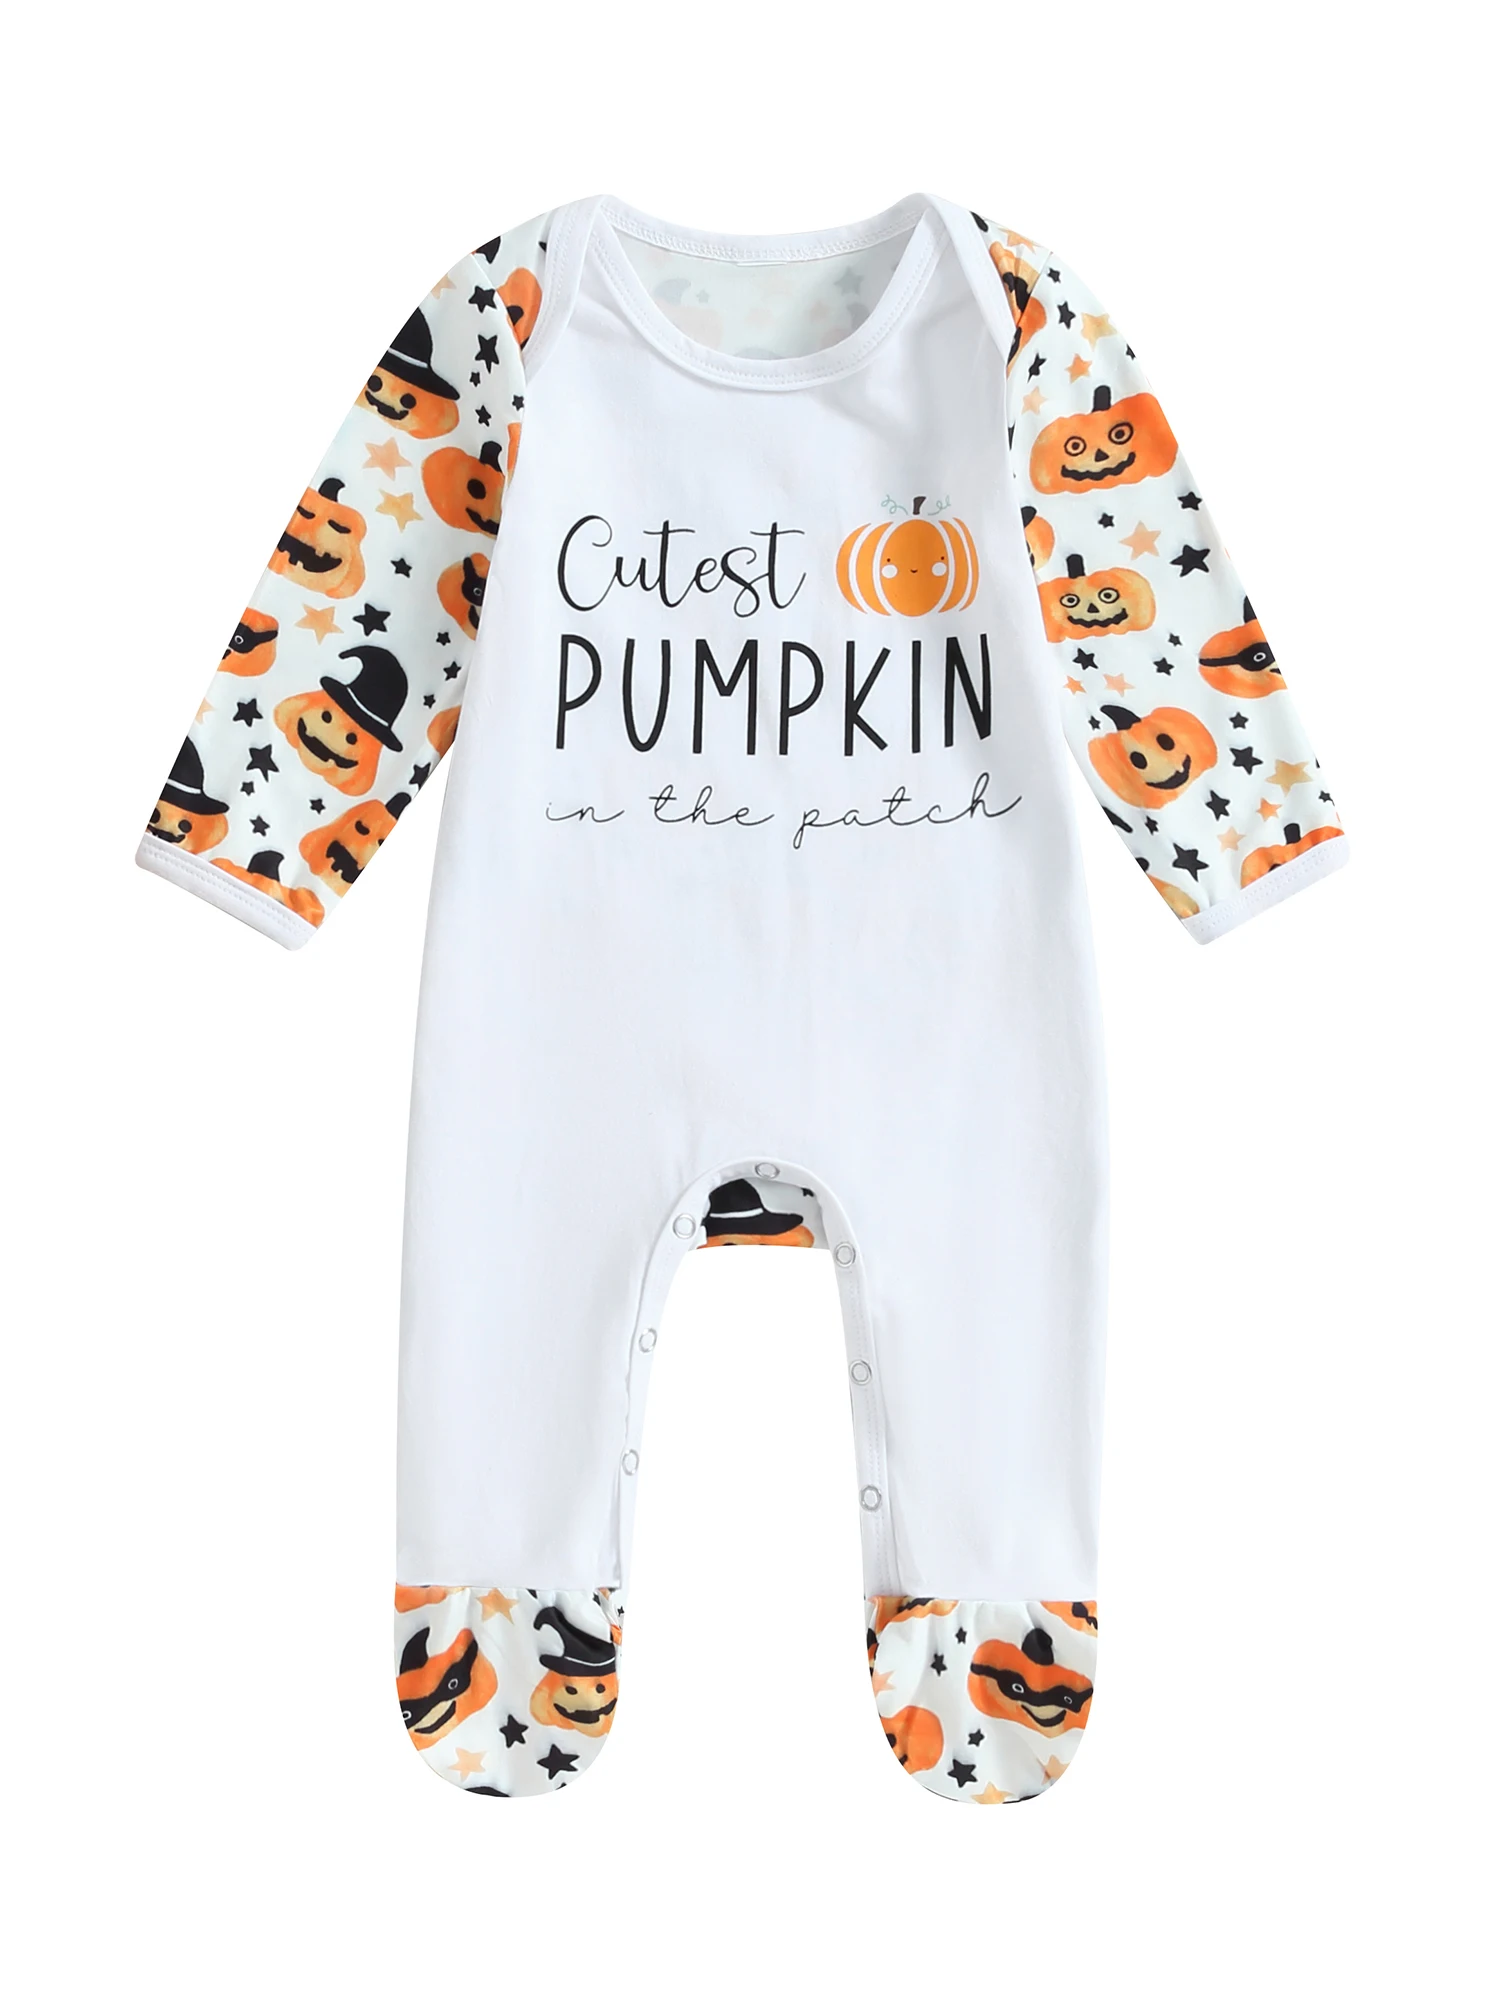 

Cute Halloween Costume for Baby Boys Adorable Pumpkin Print Romper with Long Sleeves for Newborns and Infants